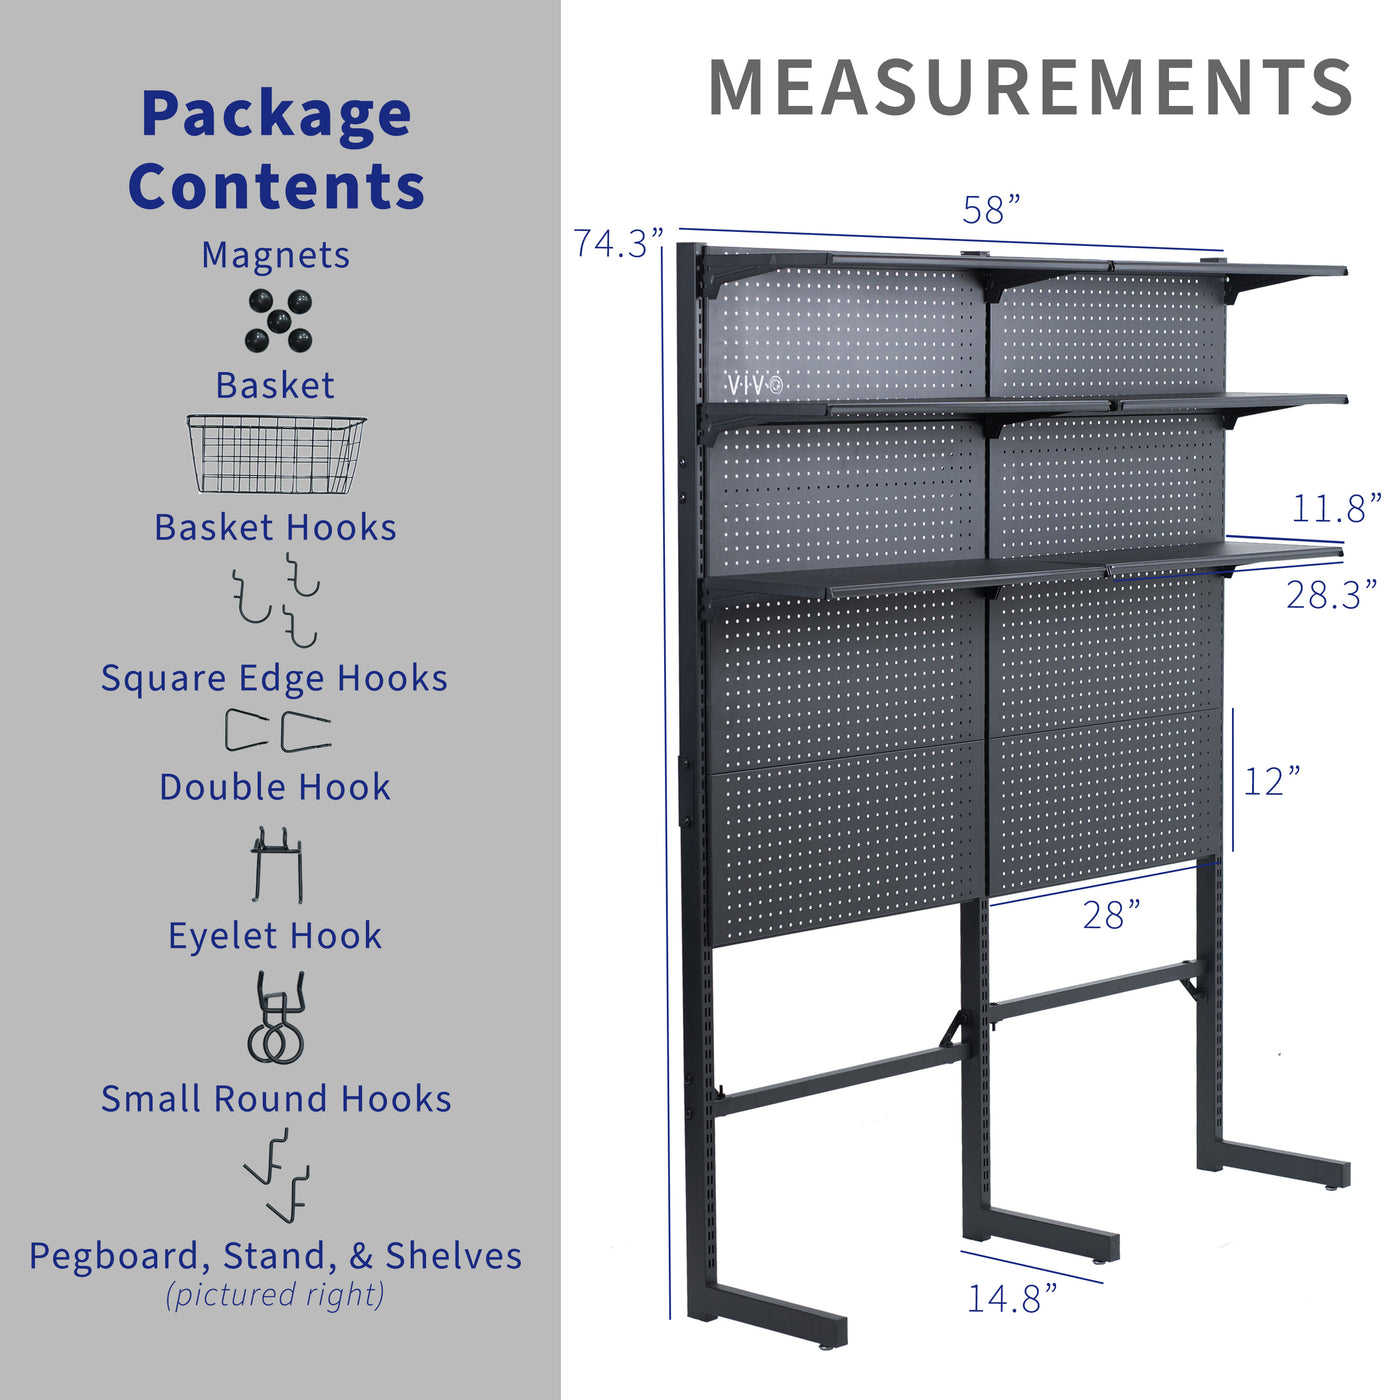 Large freestanding pegboard organizer with customizable setup for organization and space saving.